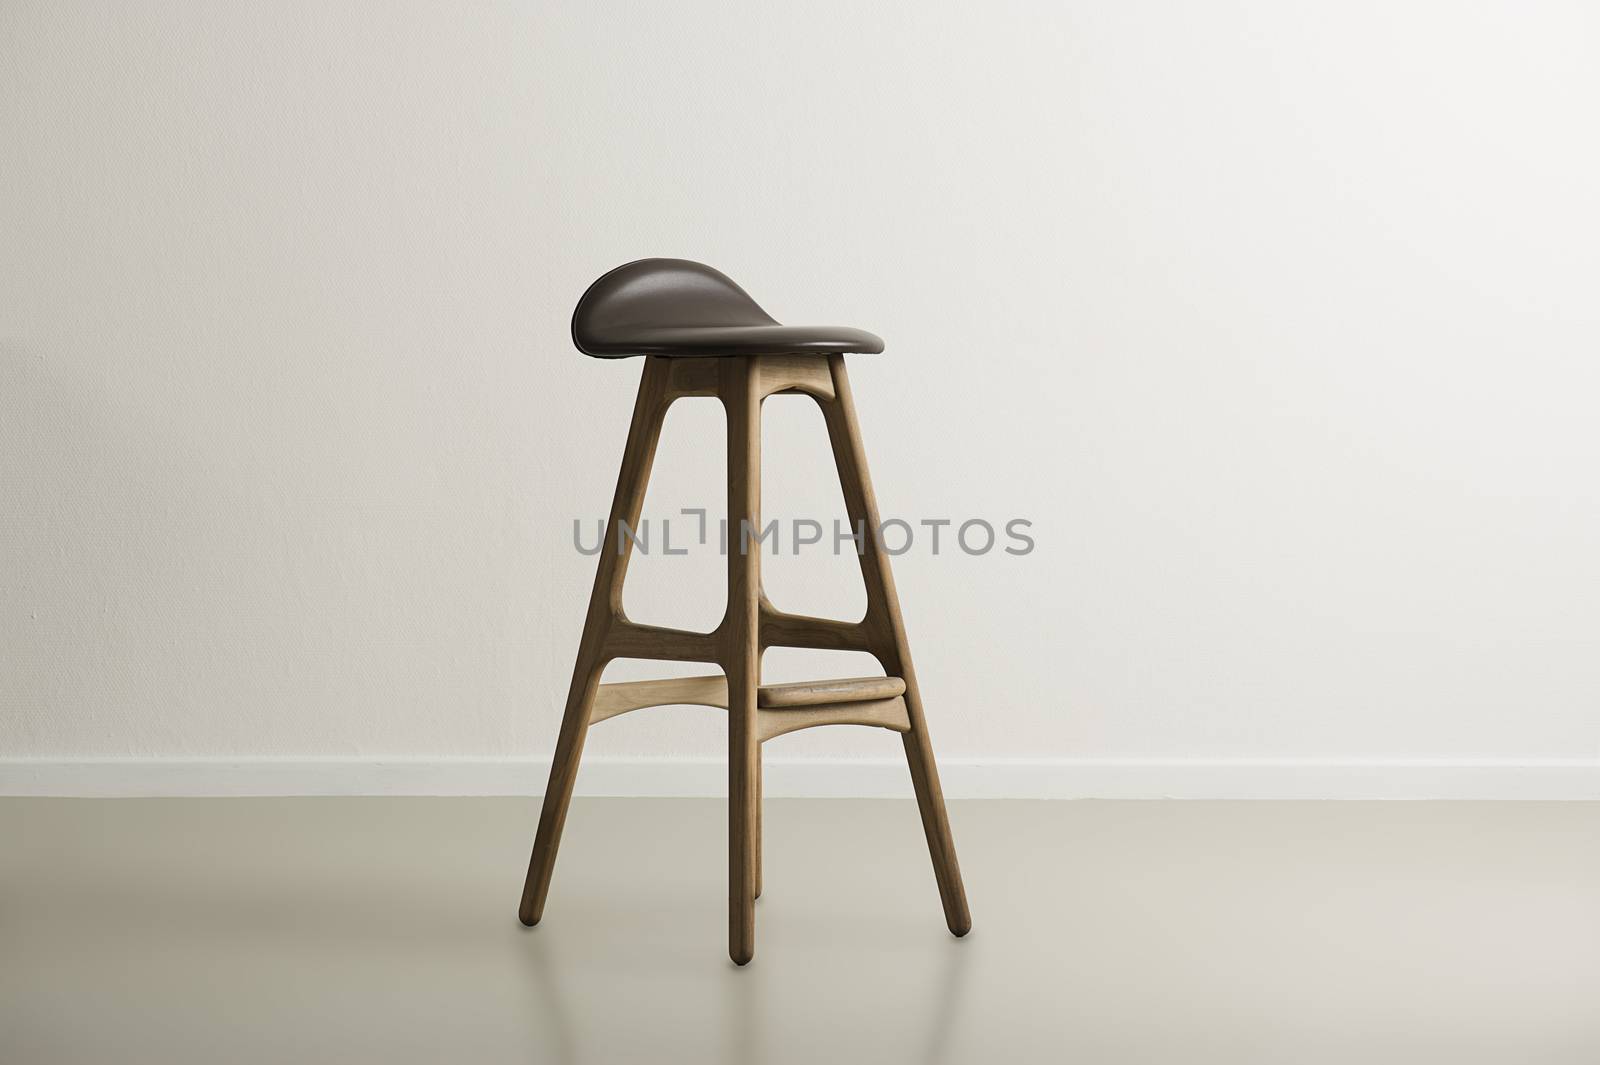 Wooden bar stool with a molded leather seat standing centered in a minimalist empty room with a white wall and copyspace, horizontal format